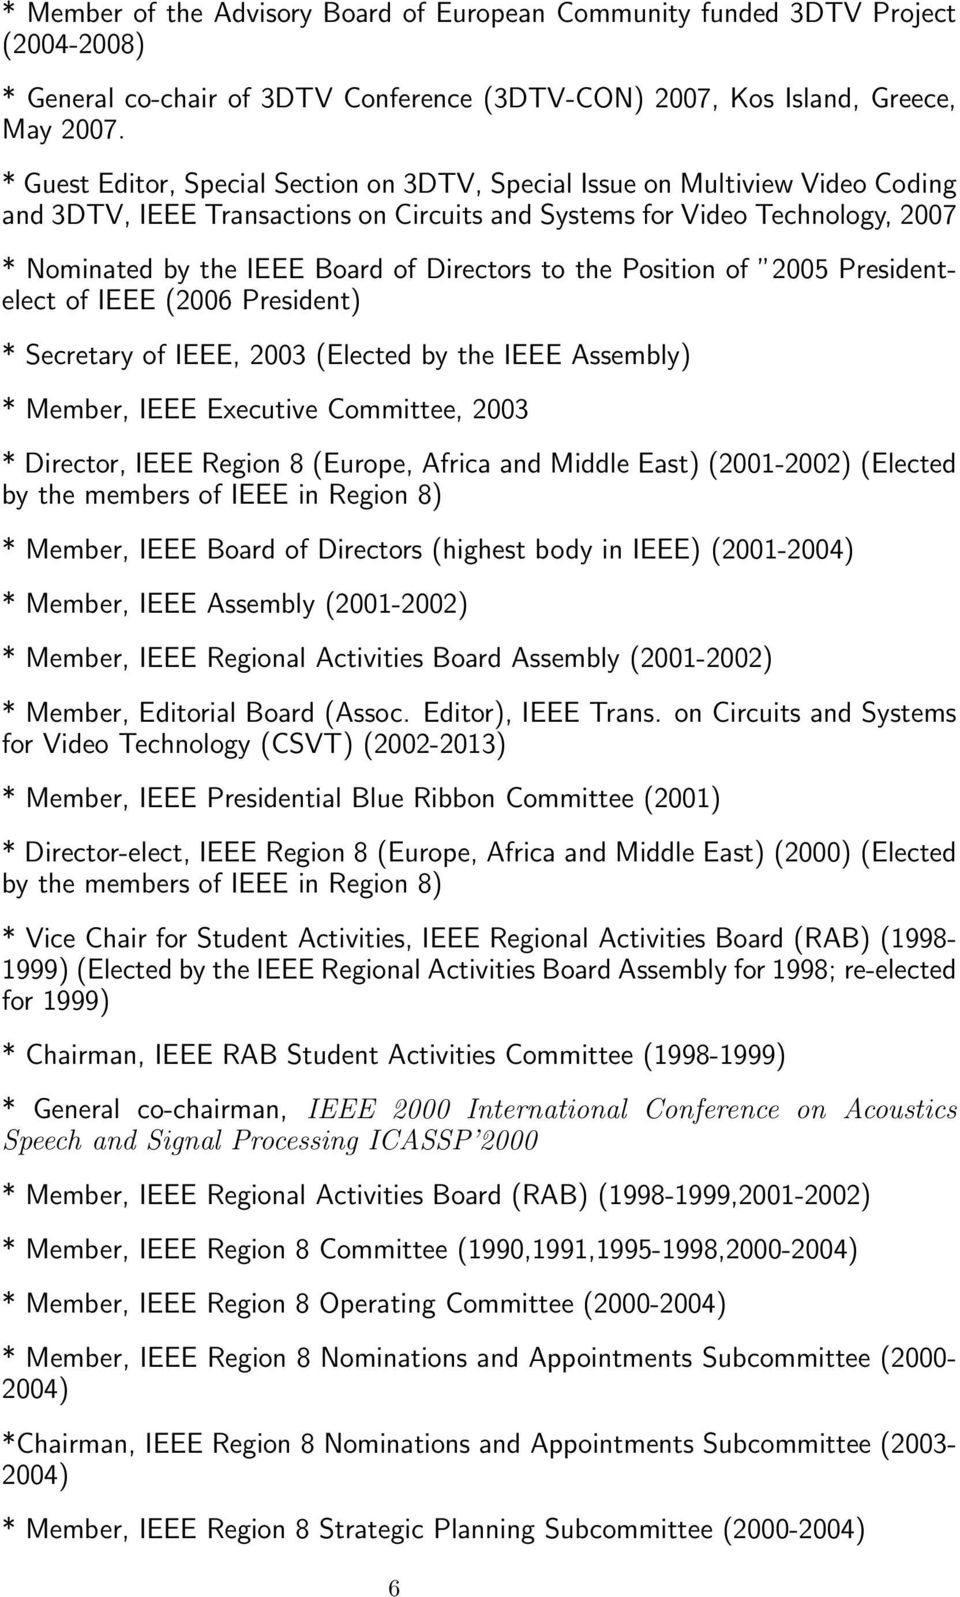 Directors to the Position of 2005 Presidentelect of IEEE (2006 President) * Secretary of IEEE, 2003 (Elected by the IEEE Assembly) * Member, IEEE Executive Committee, 2003 * Director, IEEE Region 8